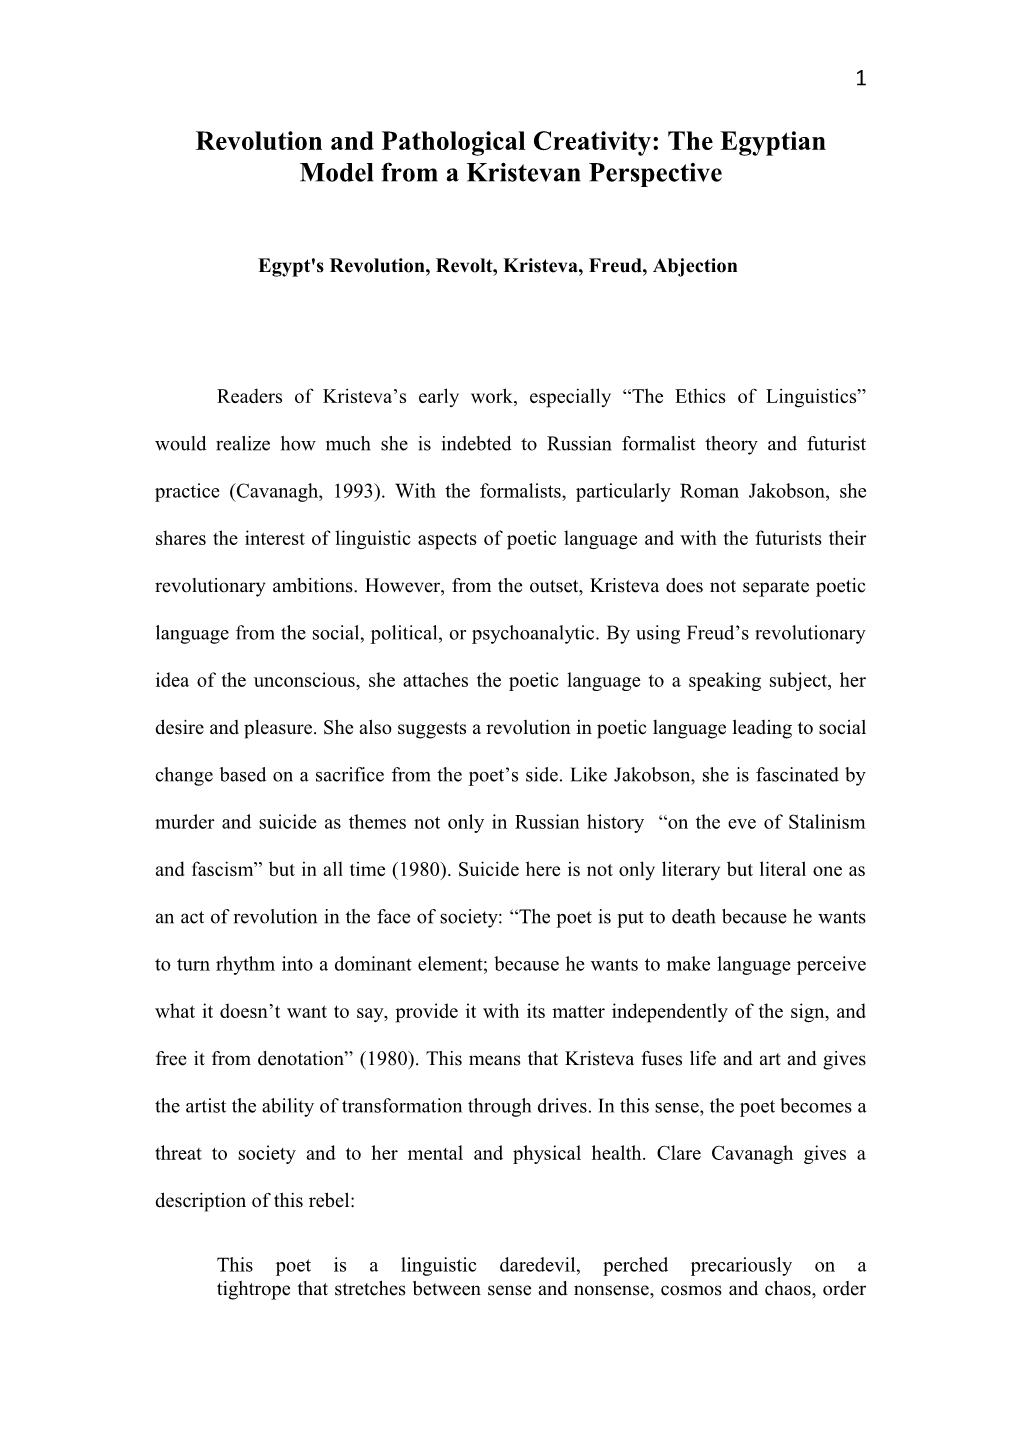 Revolution and Pathological Creativity: the Egyptian Model from a Kristevan Perspective